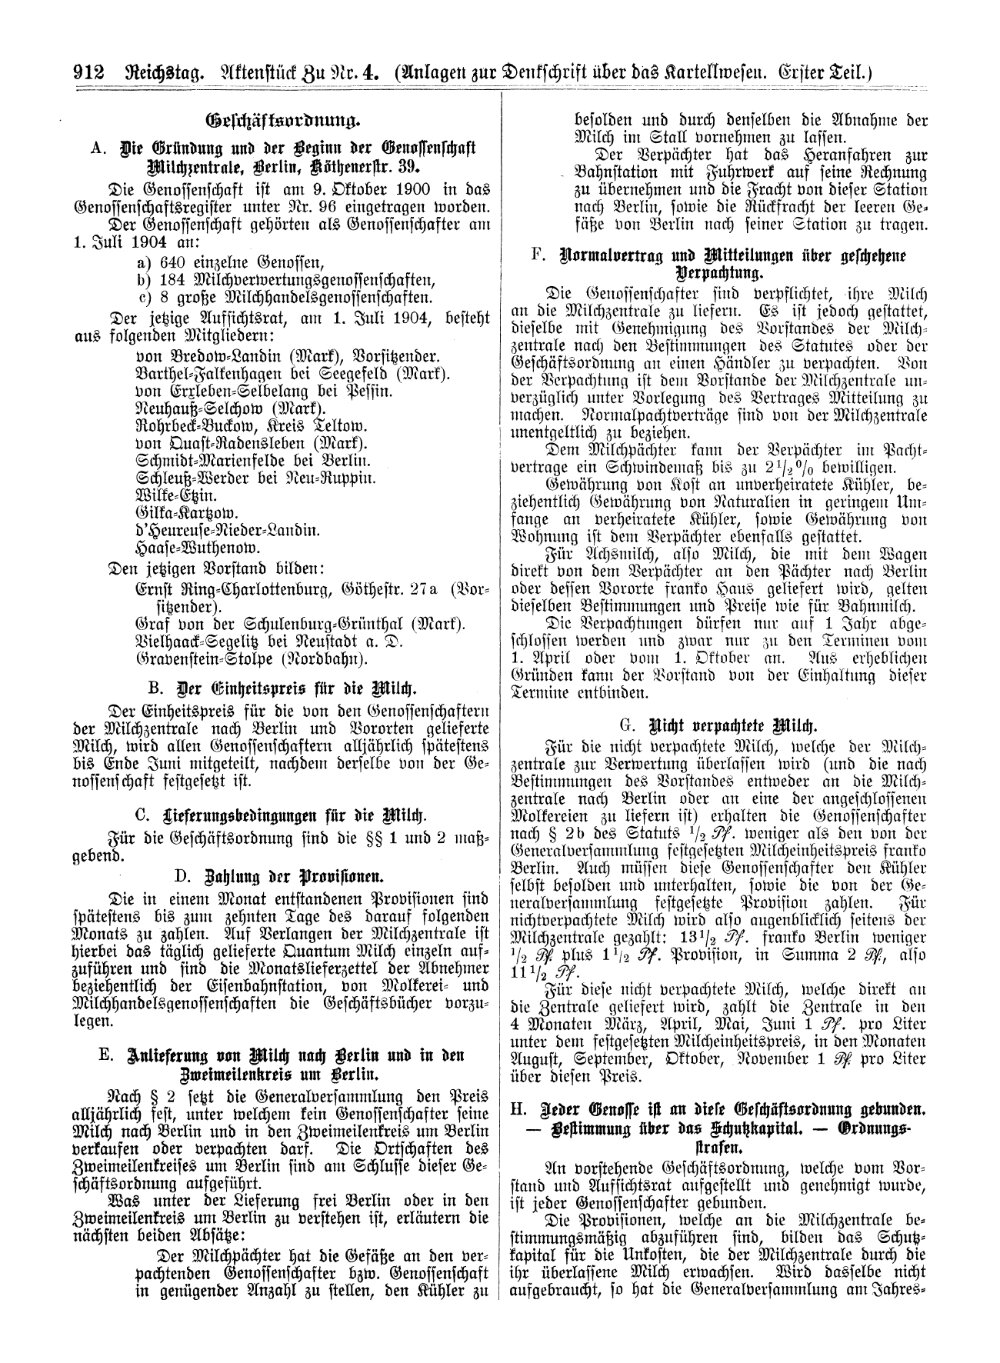 Scan of page 912